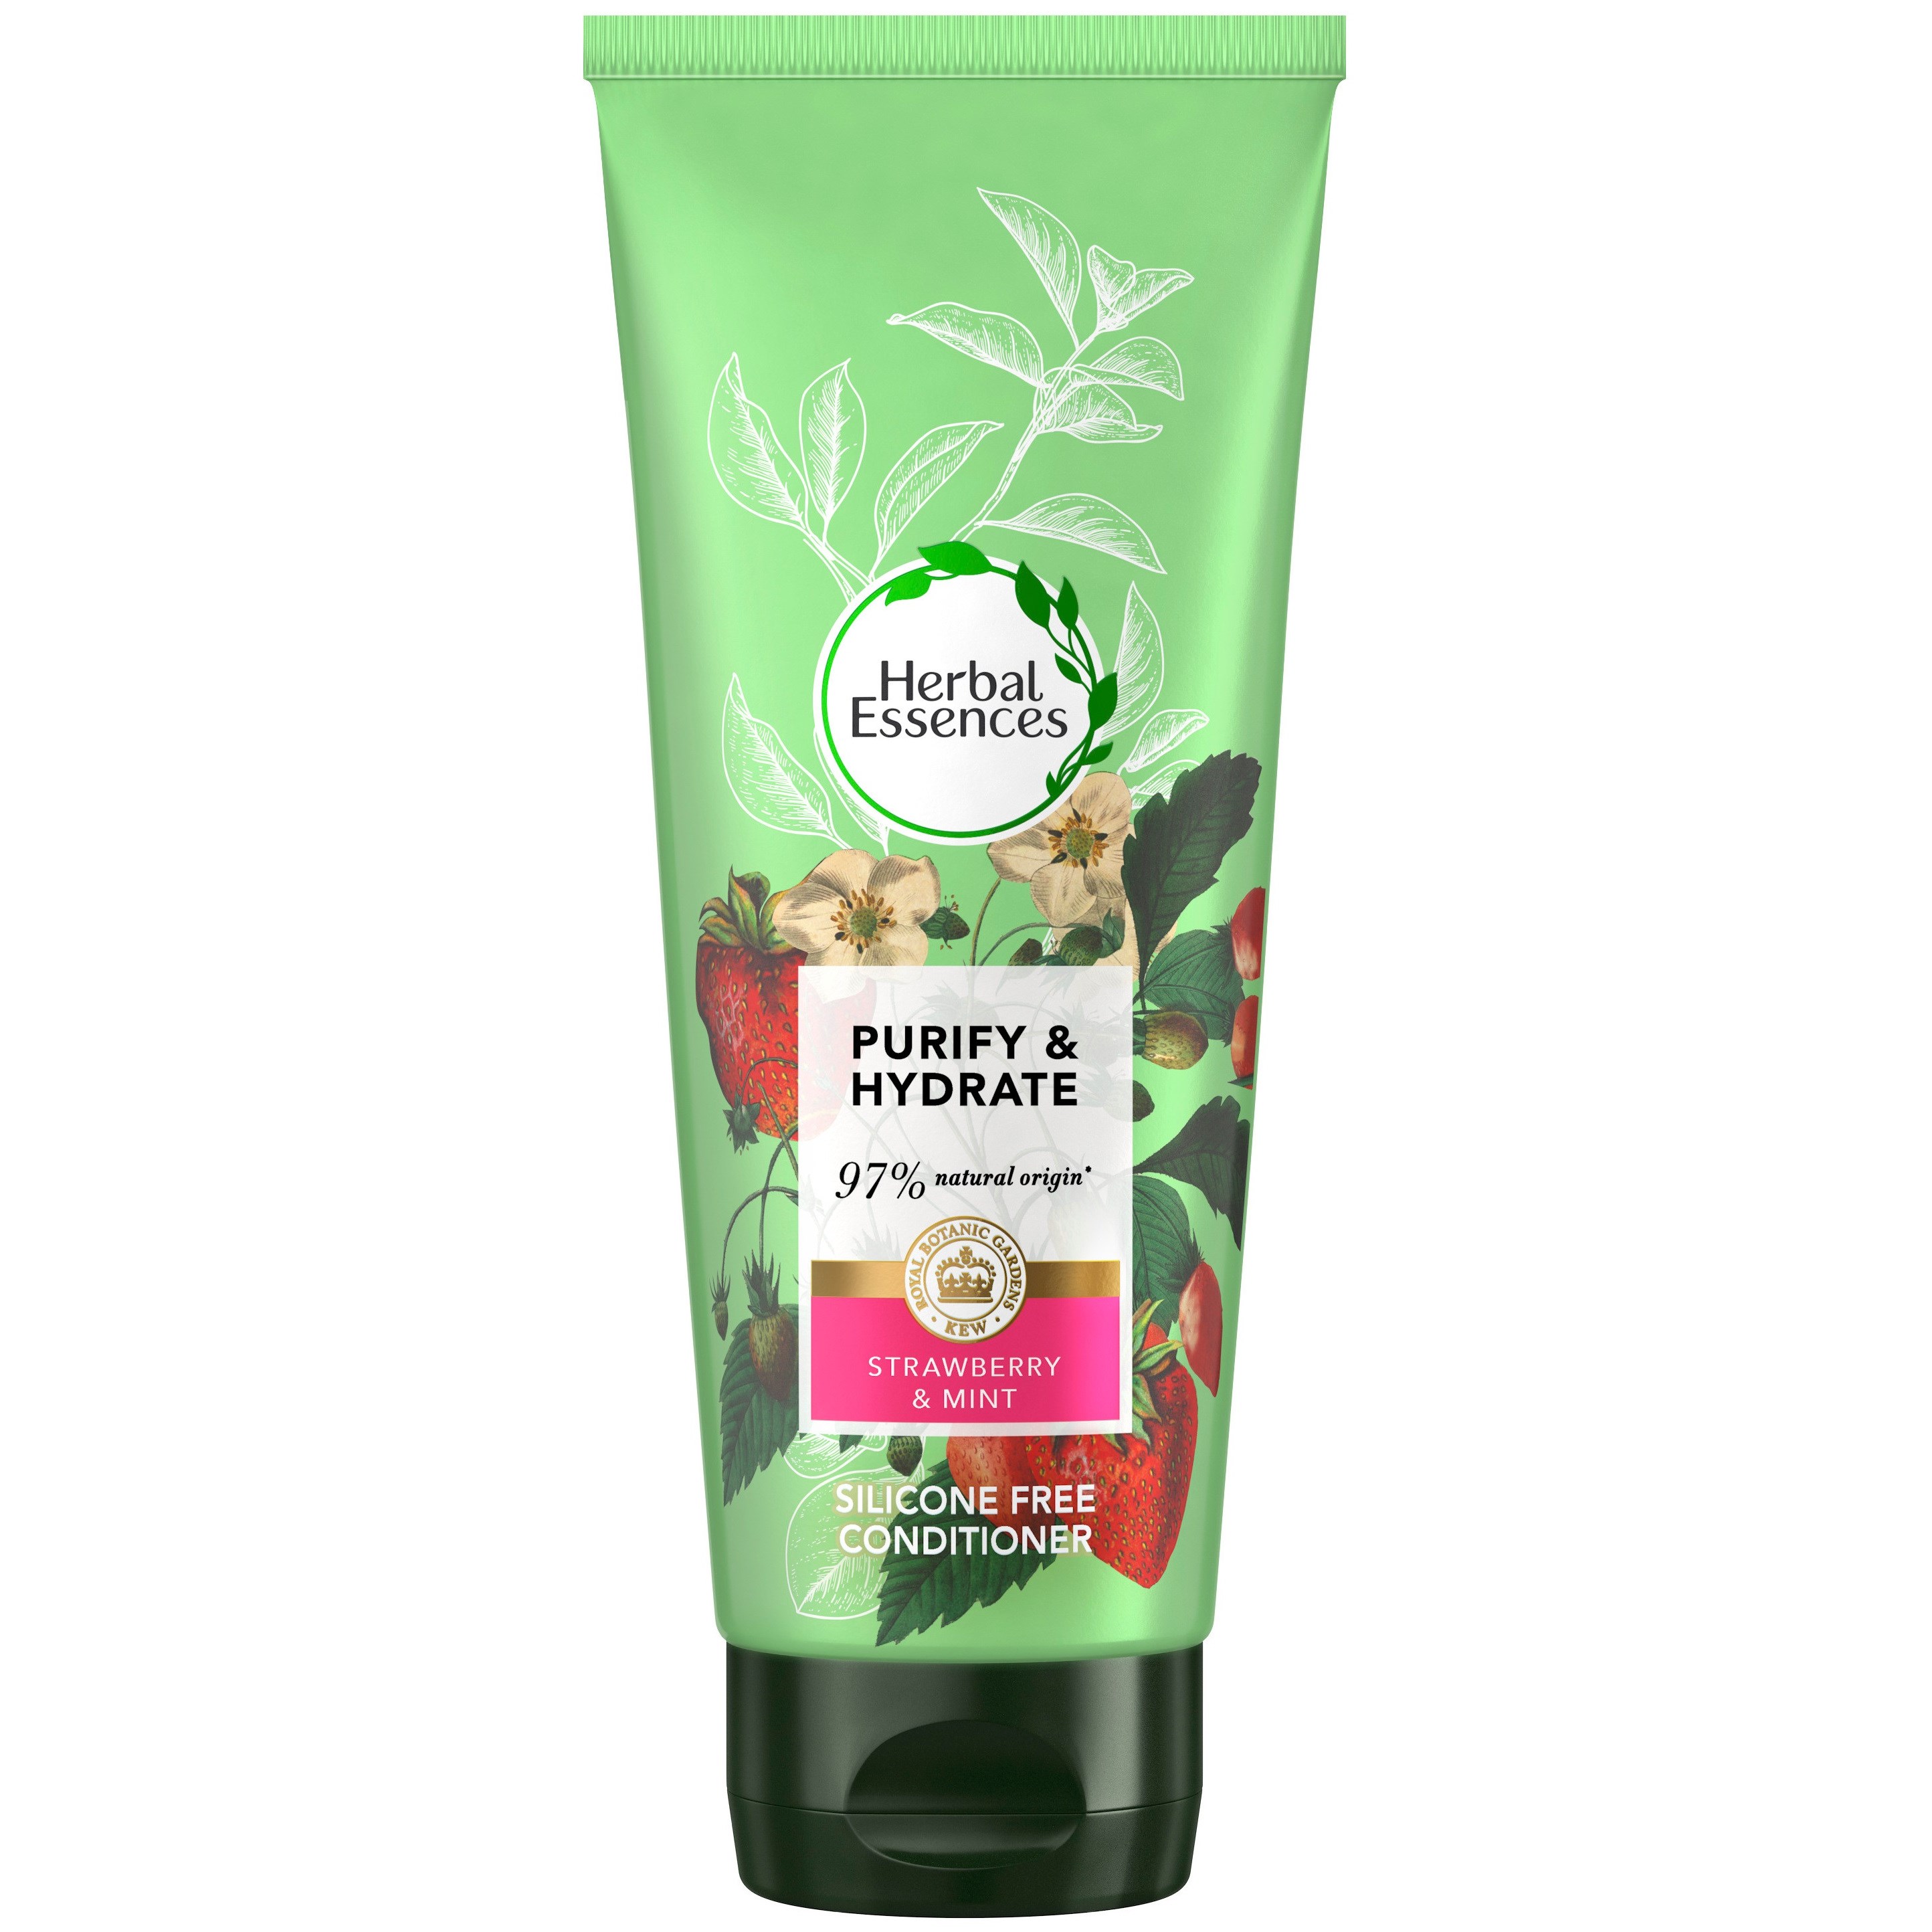 Herbal Essences Strawberry & Mint Purify and Hydrate Conditioner